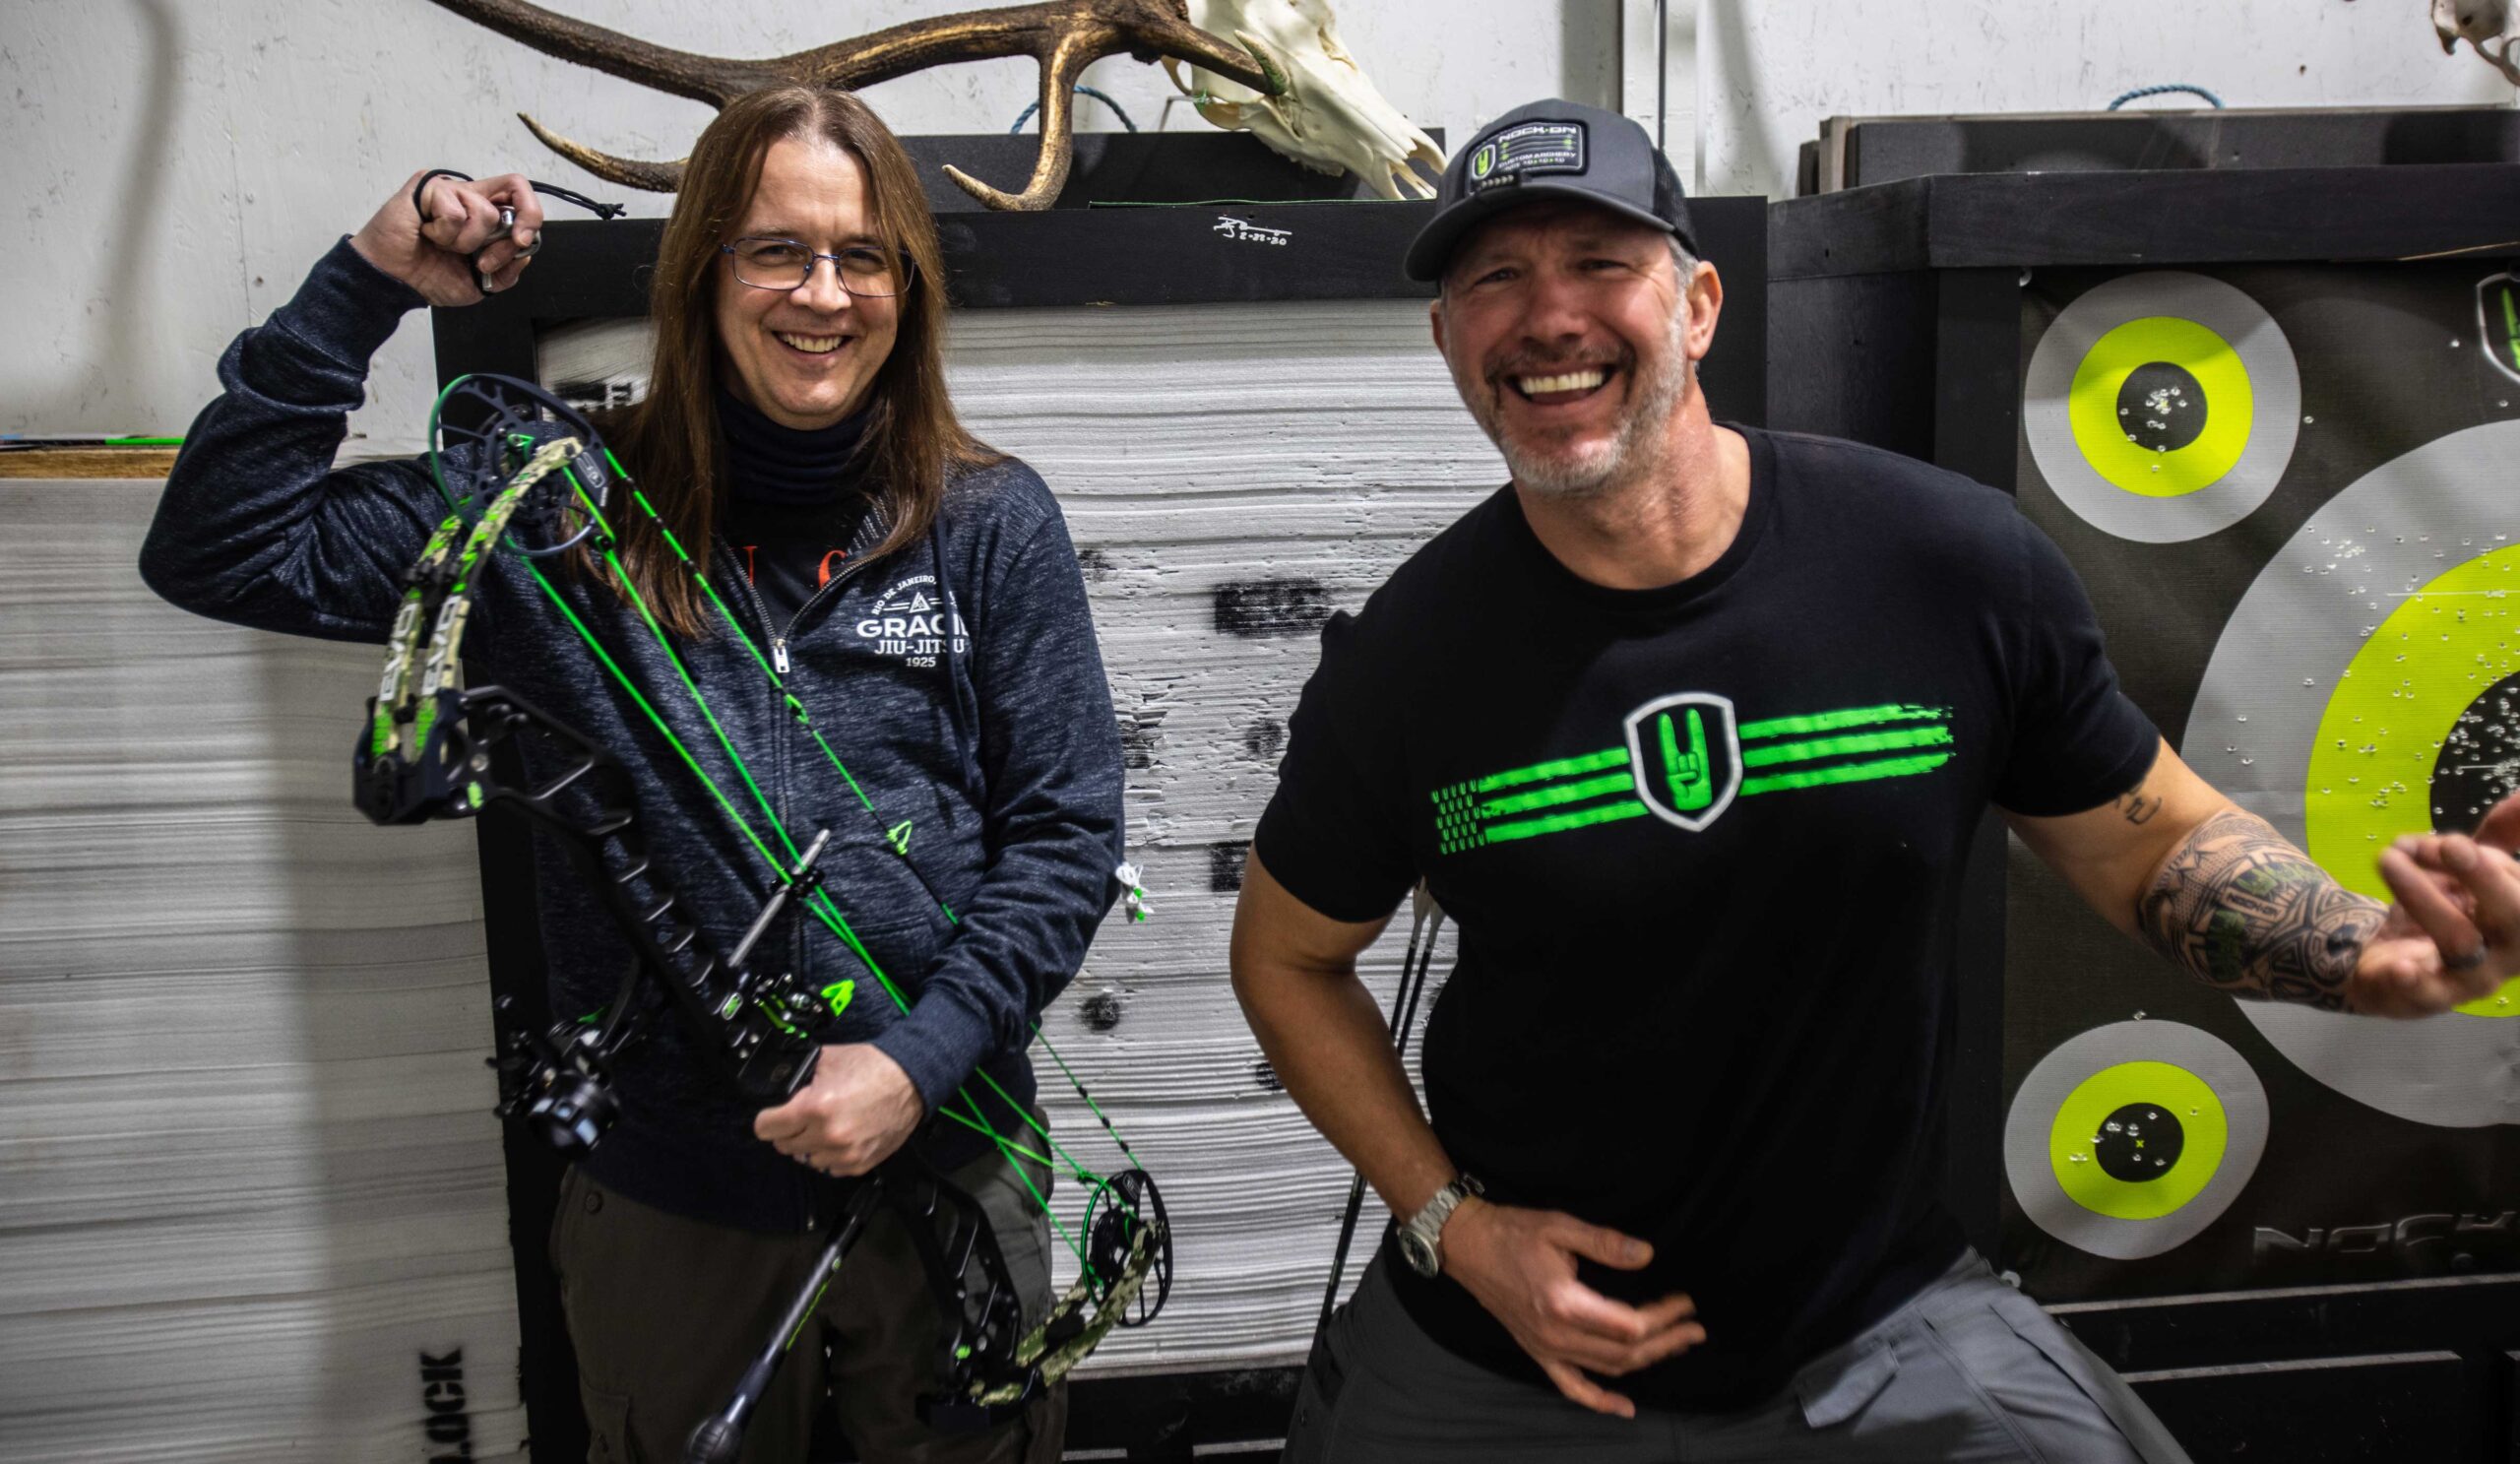 Learning Archery 101: How to Shoot a Compound Bow – Class 3 of 3